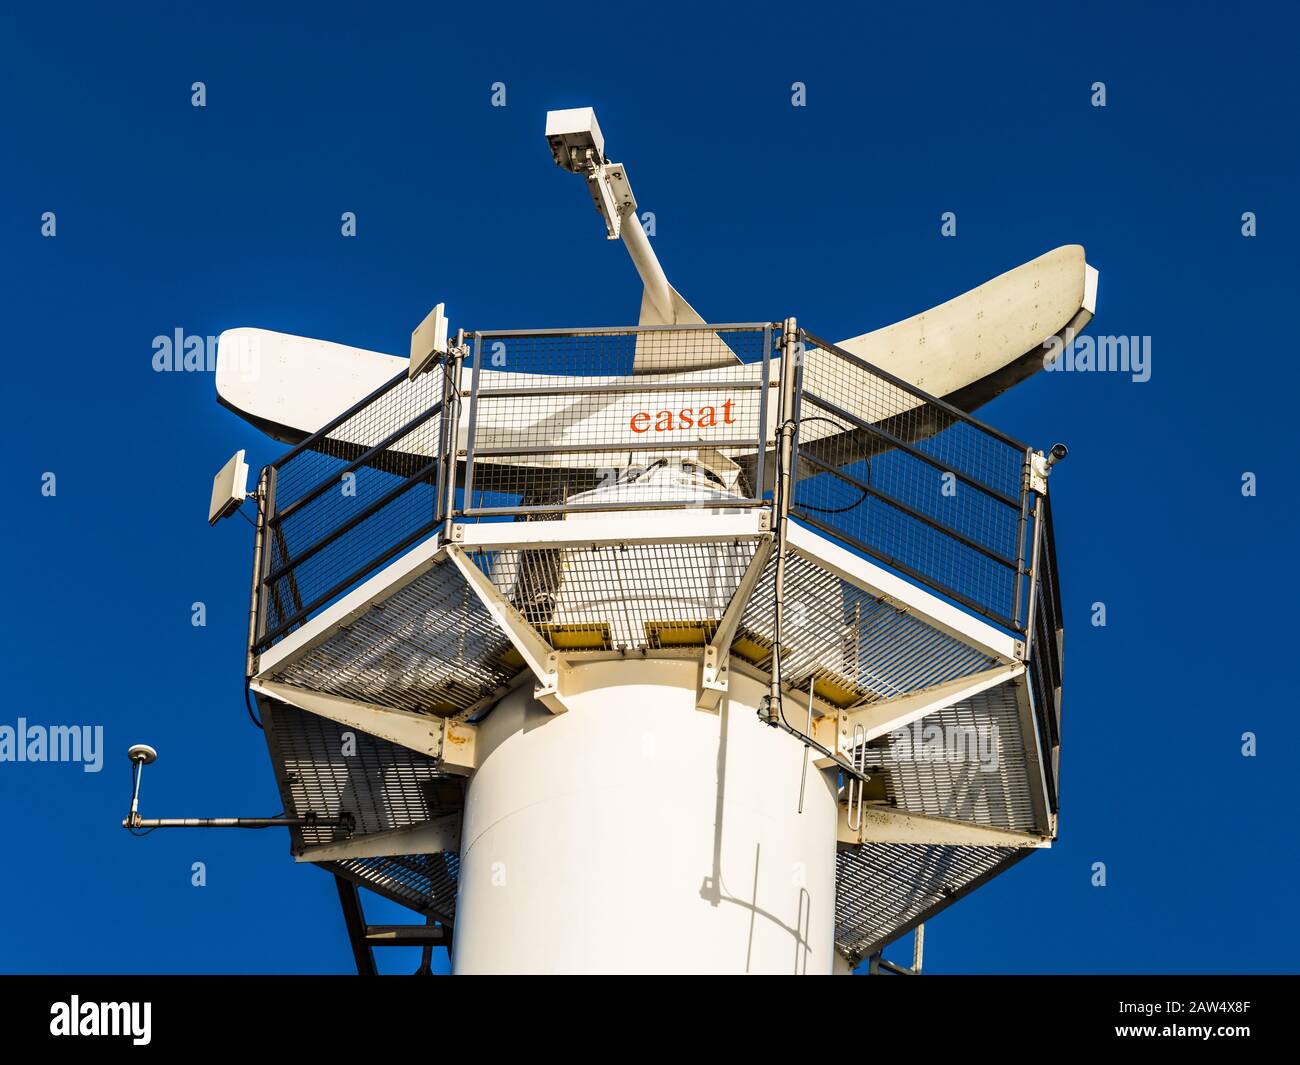 Marine Radar - The Easat marine radar at the entrance to the port of Felixstowe in Suffolk, UK. Felixstowe is the UKs main container shipping port. Stock Photo